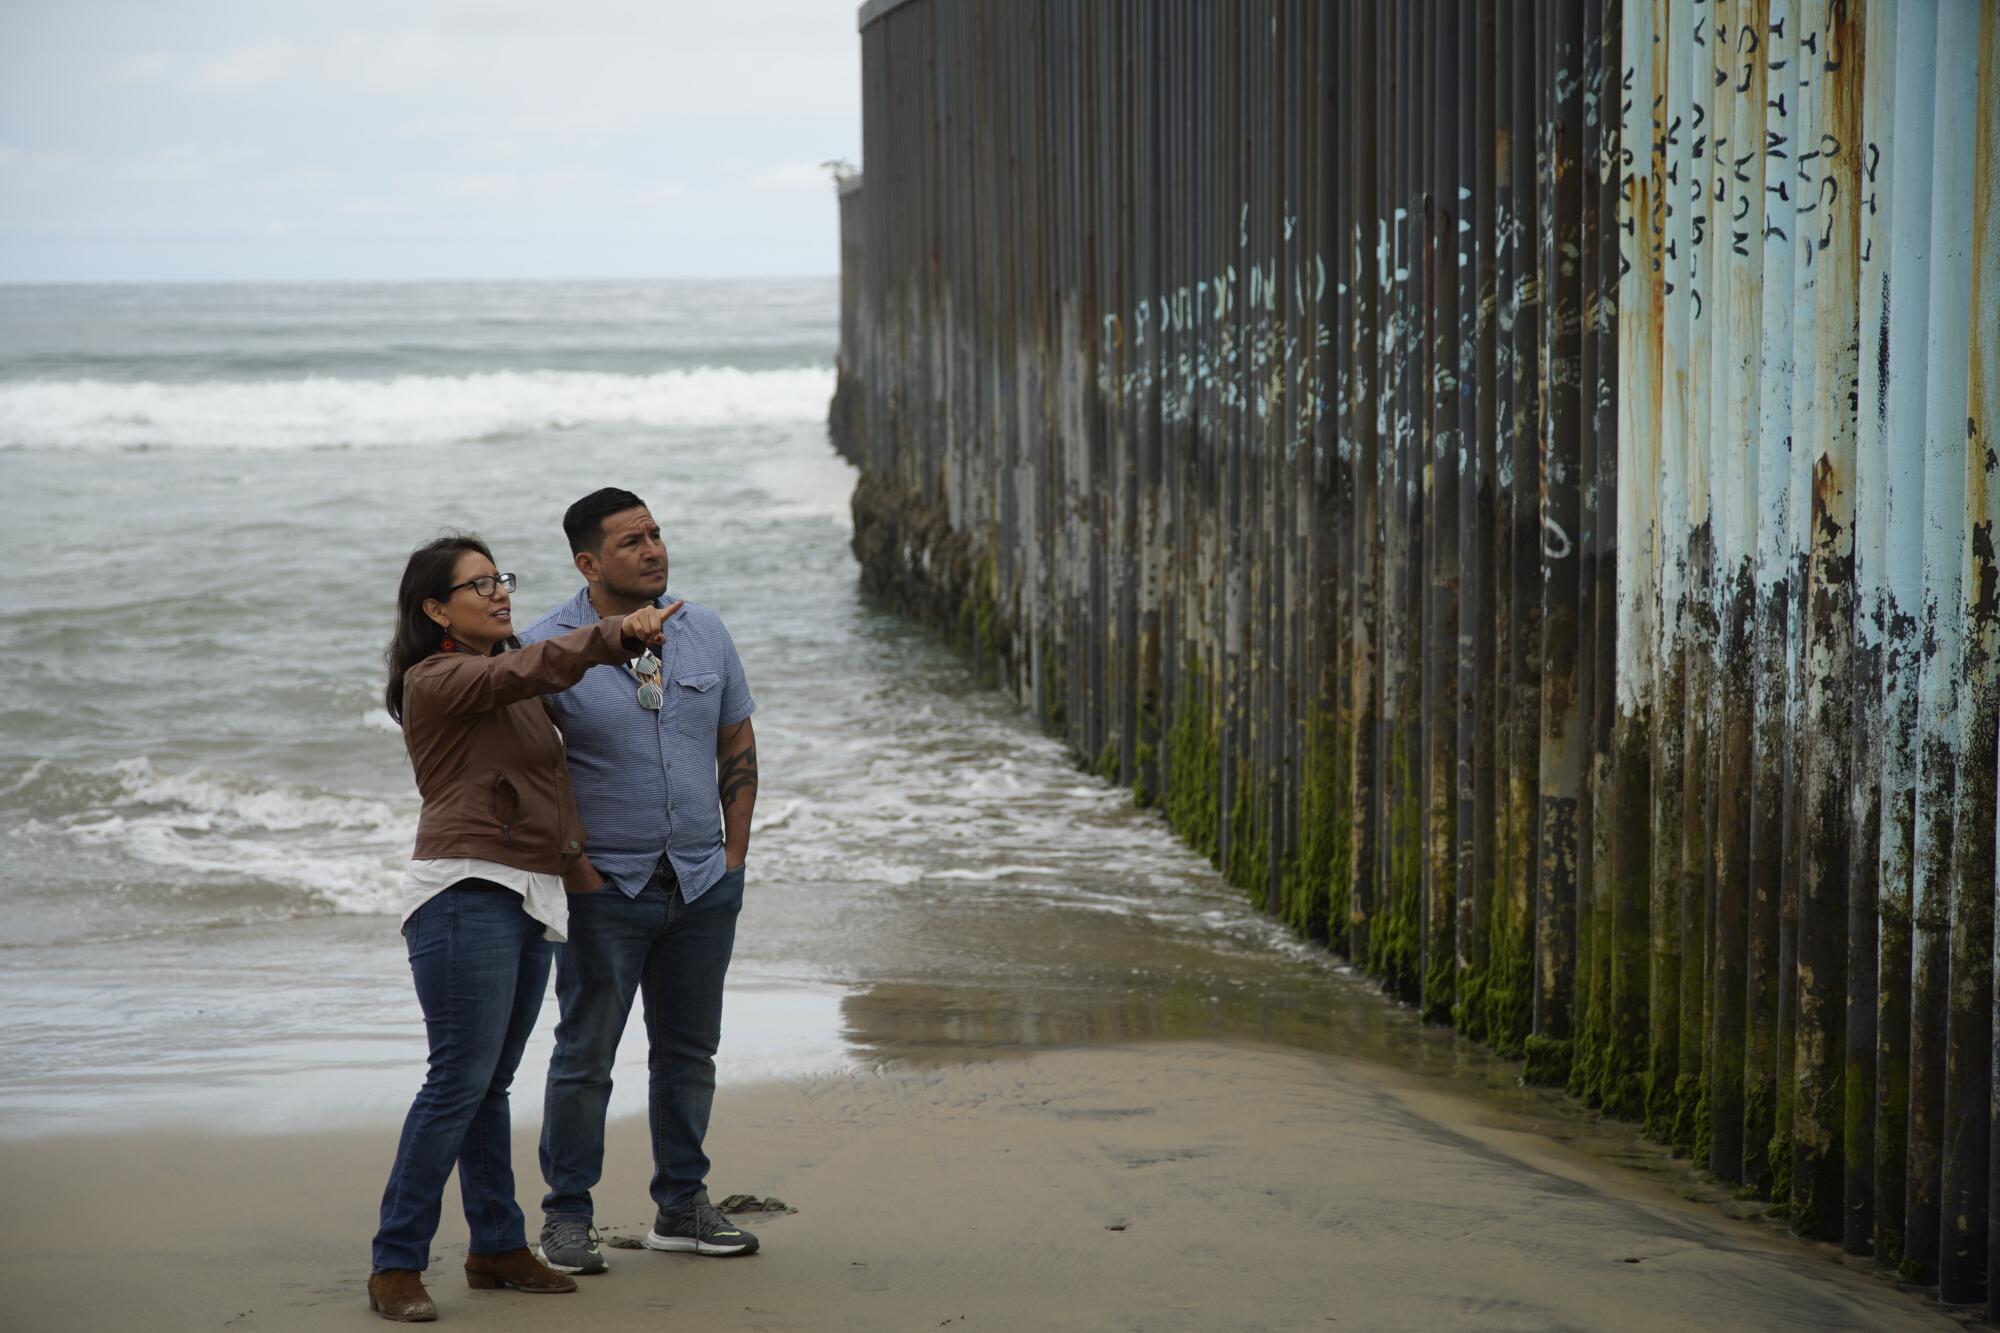 On her last day in Mexico, Dulce Garcia and her brother visit the border fence at Playas de Tijuana